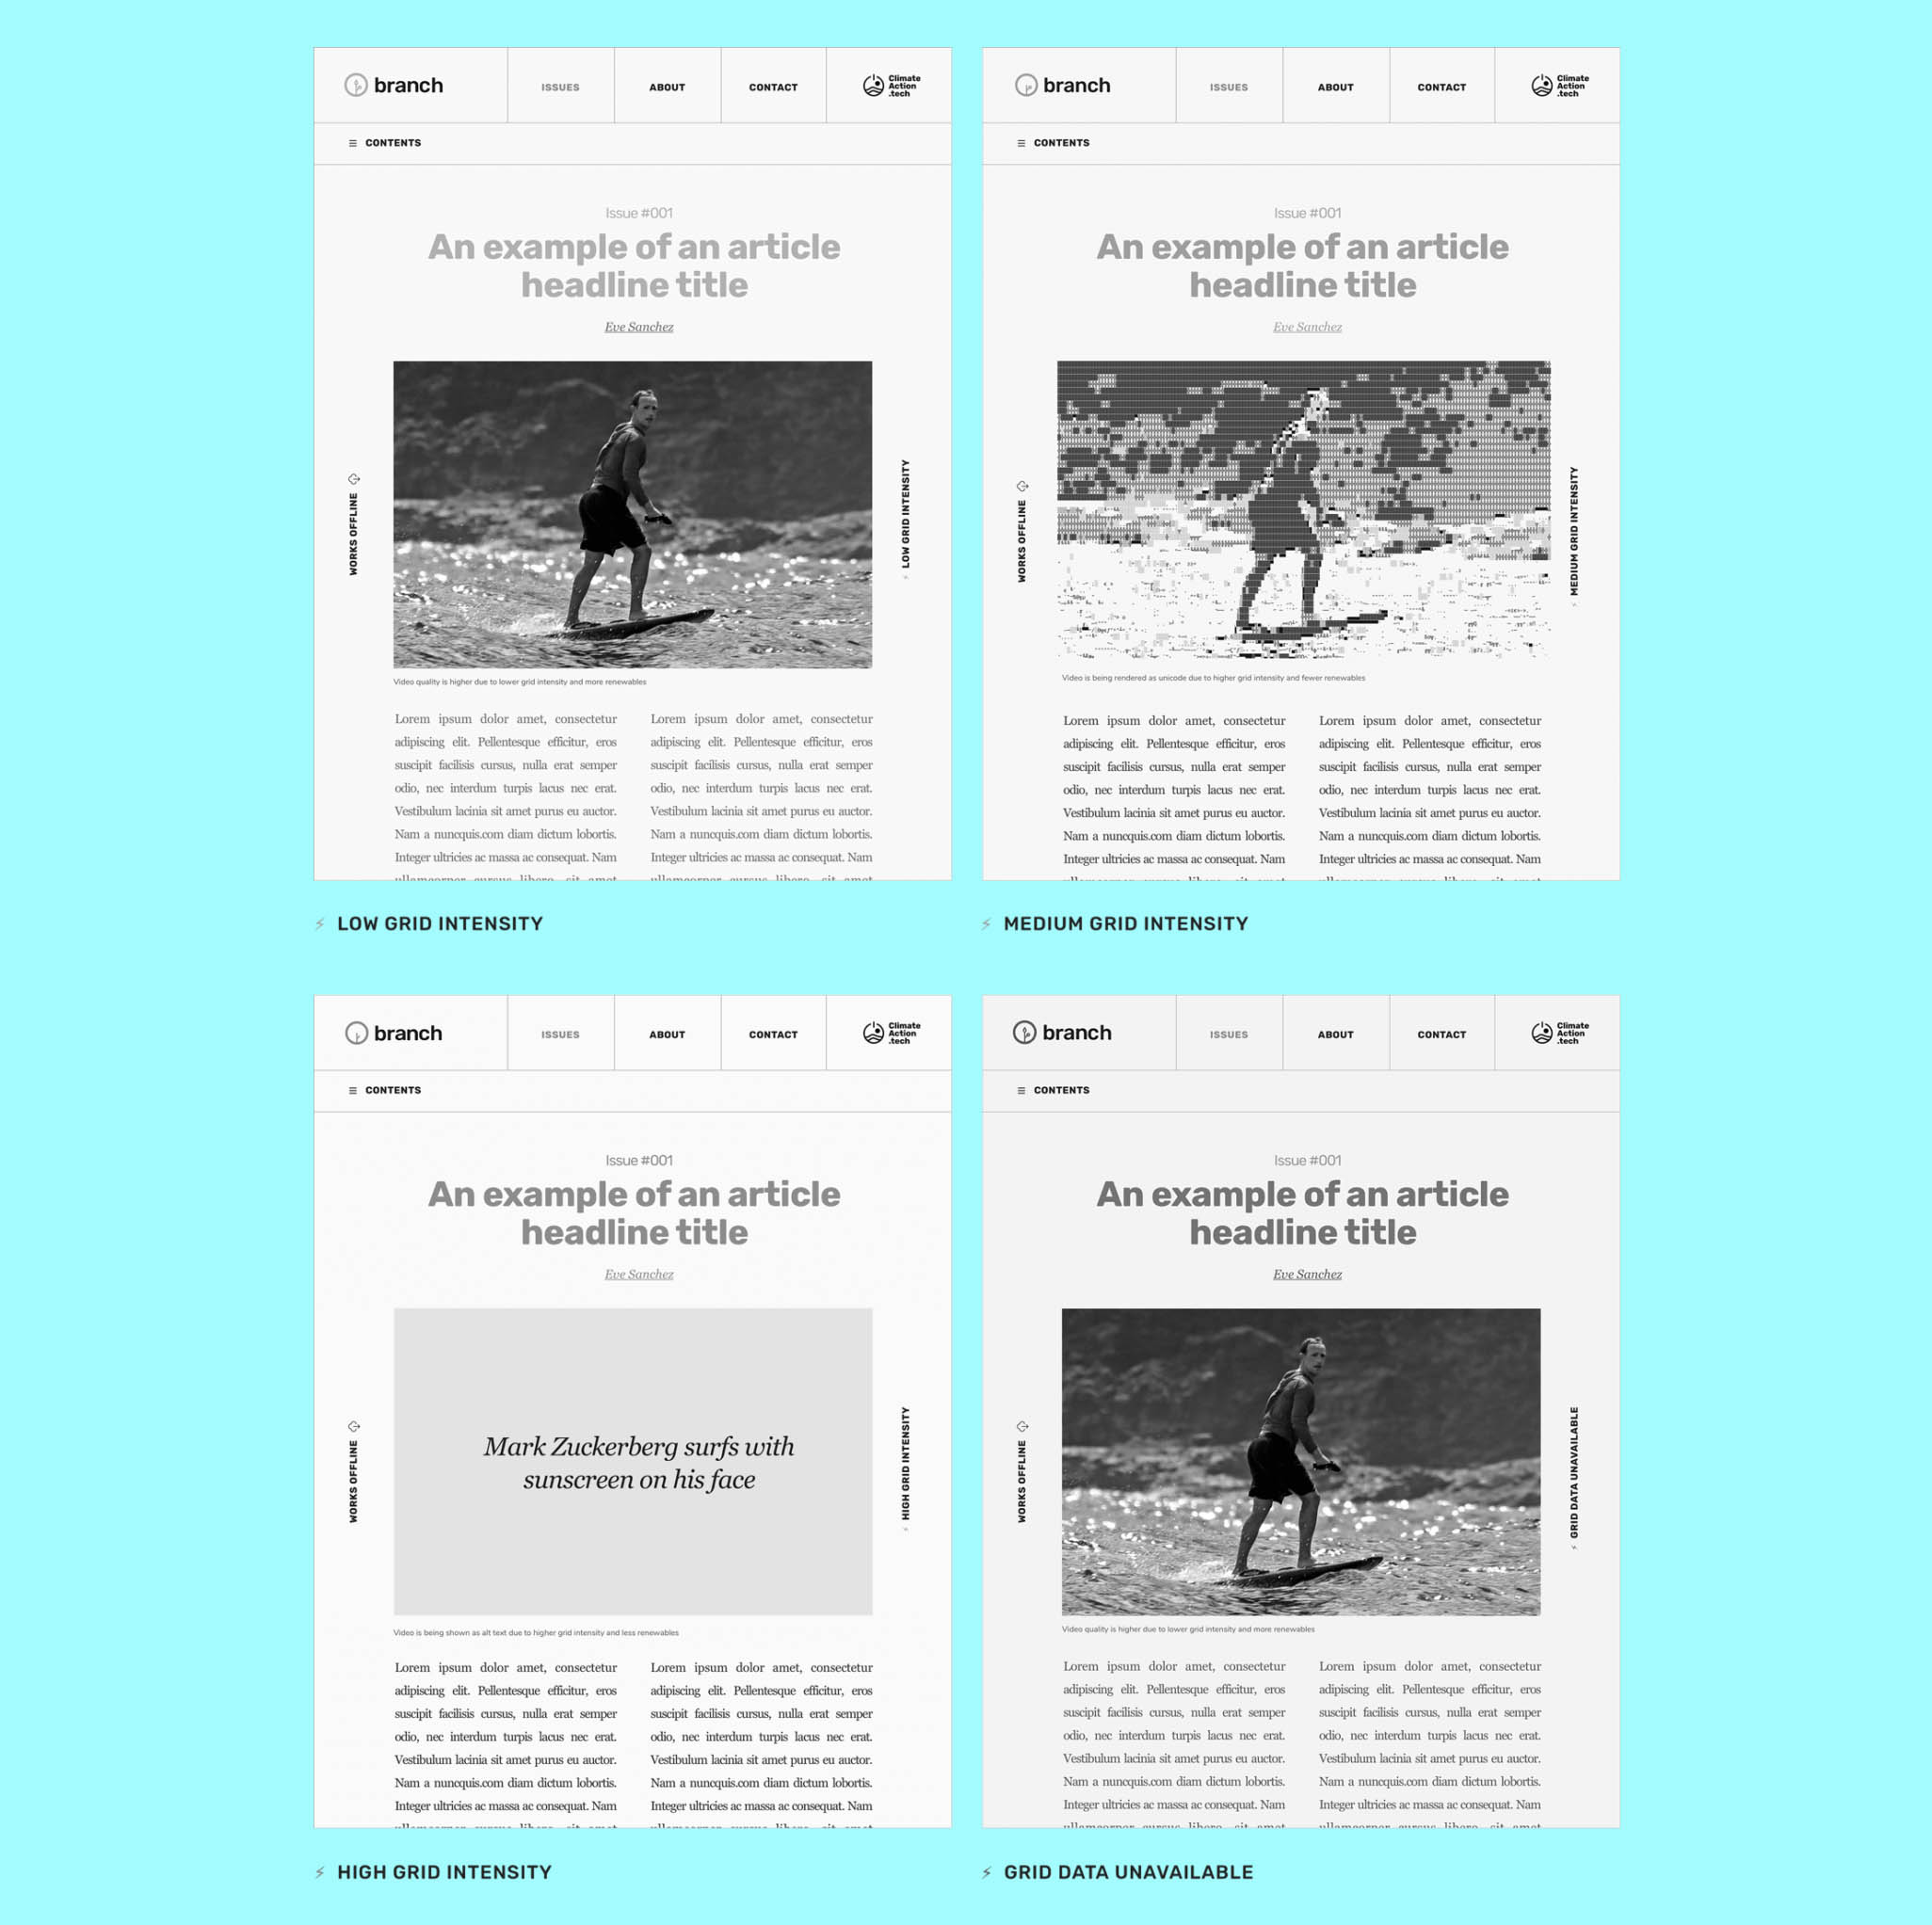 Four example online magazine page renderings differentiated by grid intensity, with simpler renderings during high intensity periods